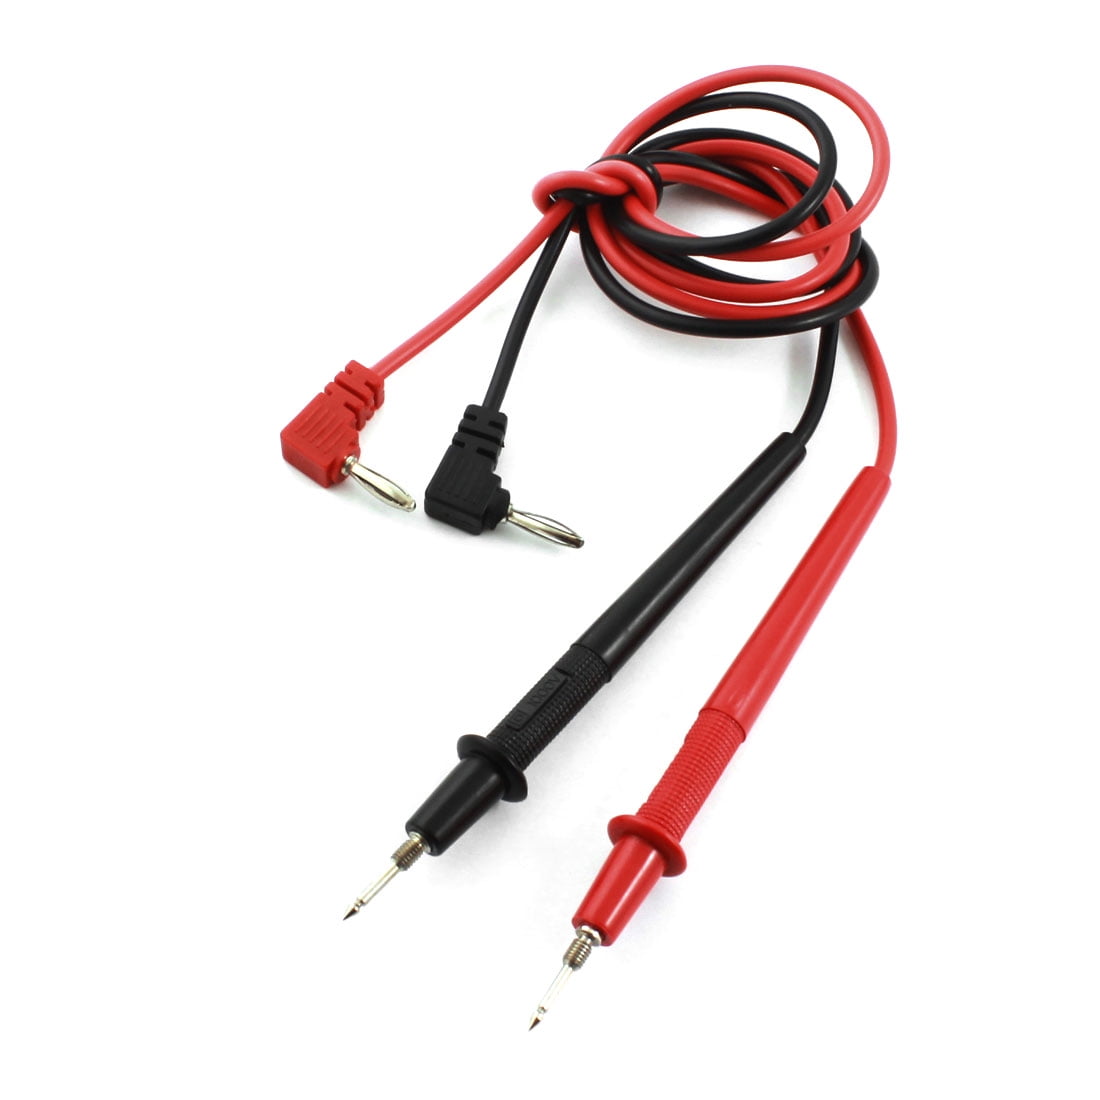 Double injection gun type banana plug test Cable for Multimeters 